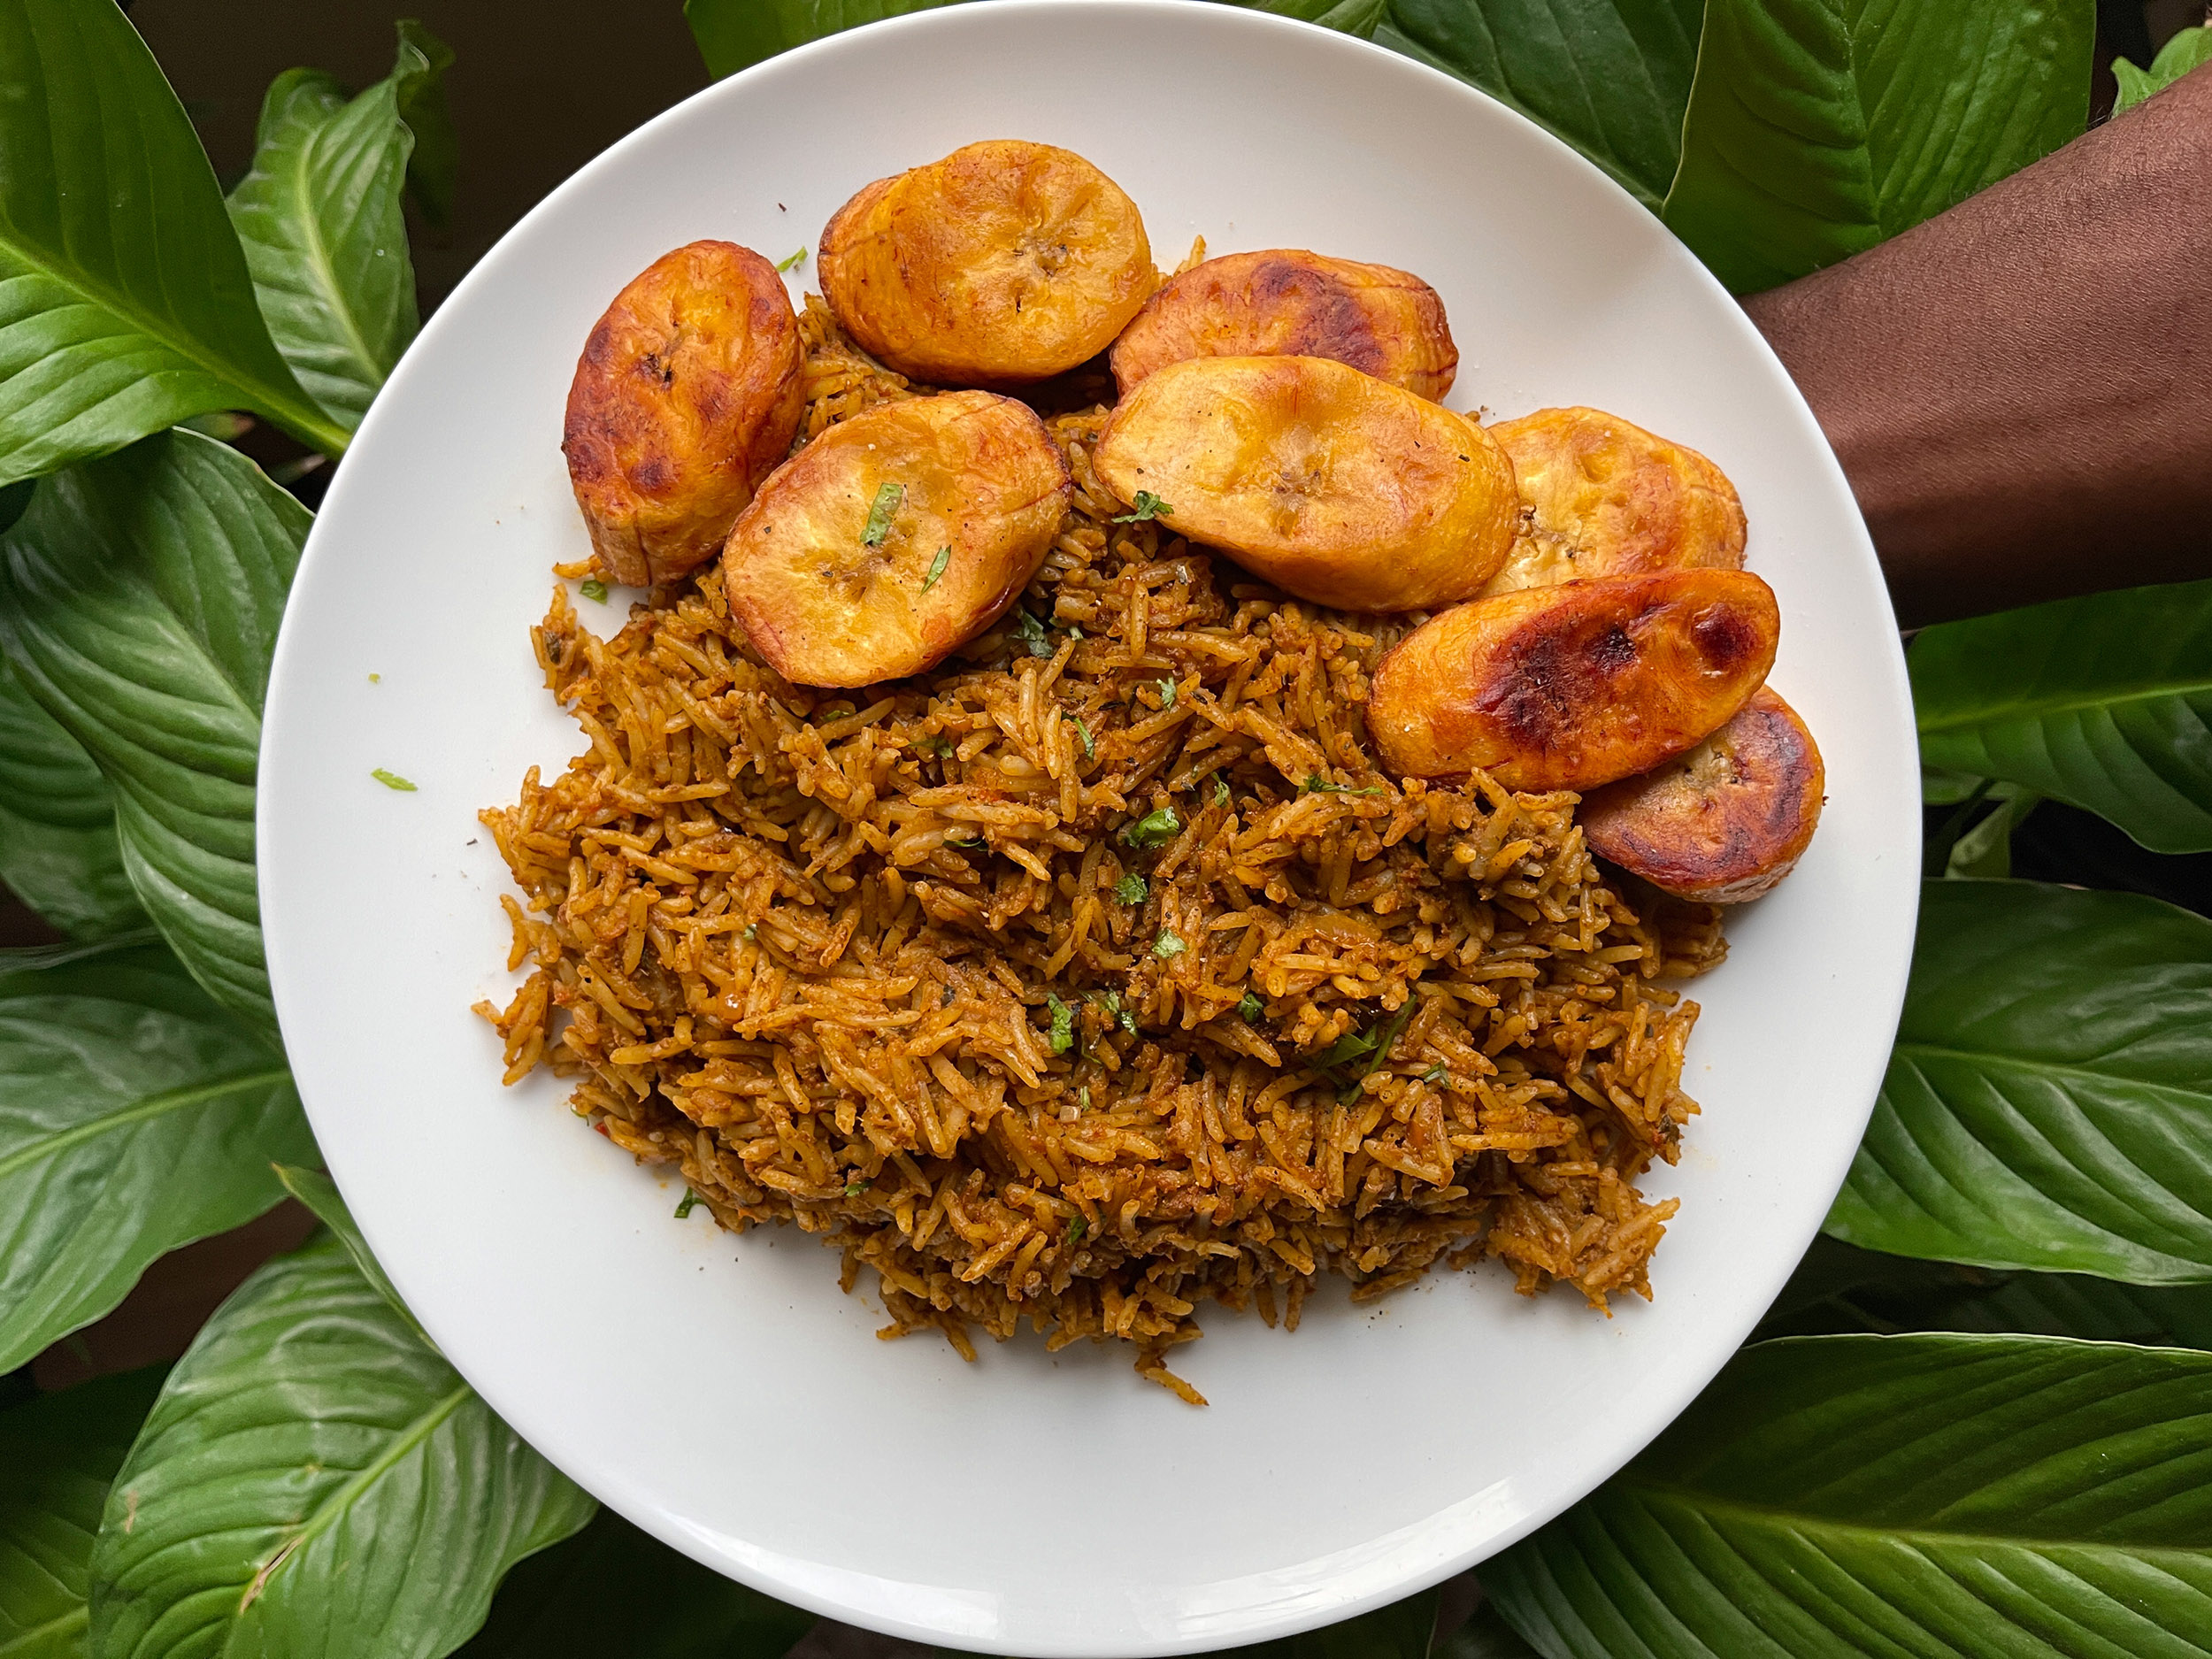 A beautifully presented plate of banga rice with fried plantain, against a background of lush green leaves.